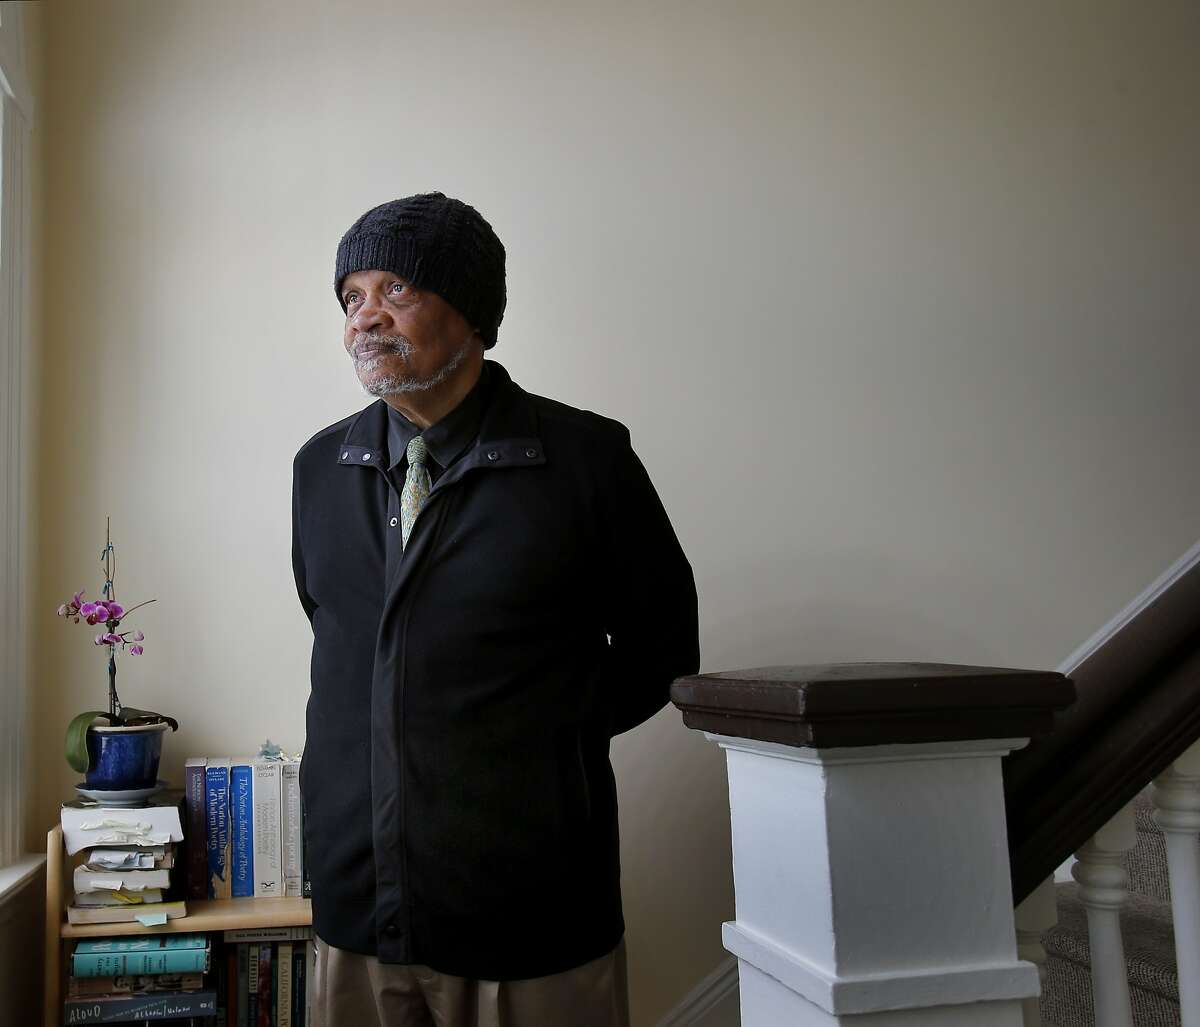 Poet Ishmael Reed stands on the staircase of his East Bay home Tuesday April 1, 2014. SFJAZZ Poet Laureate Ishmael Reed is heading a diverse group of poets for the first SFJAZZ Poetry festival.